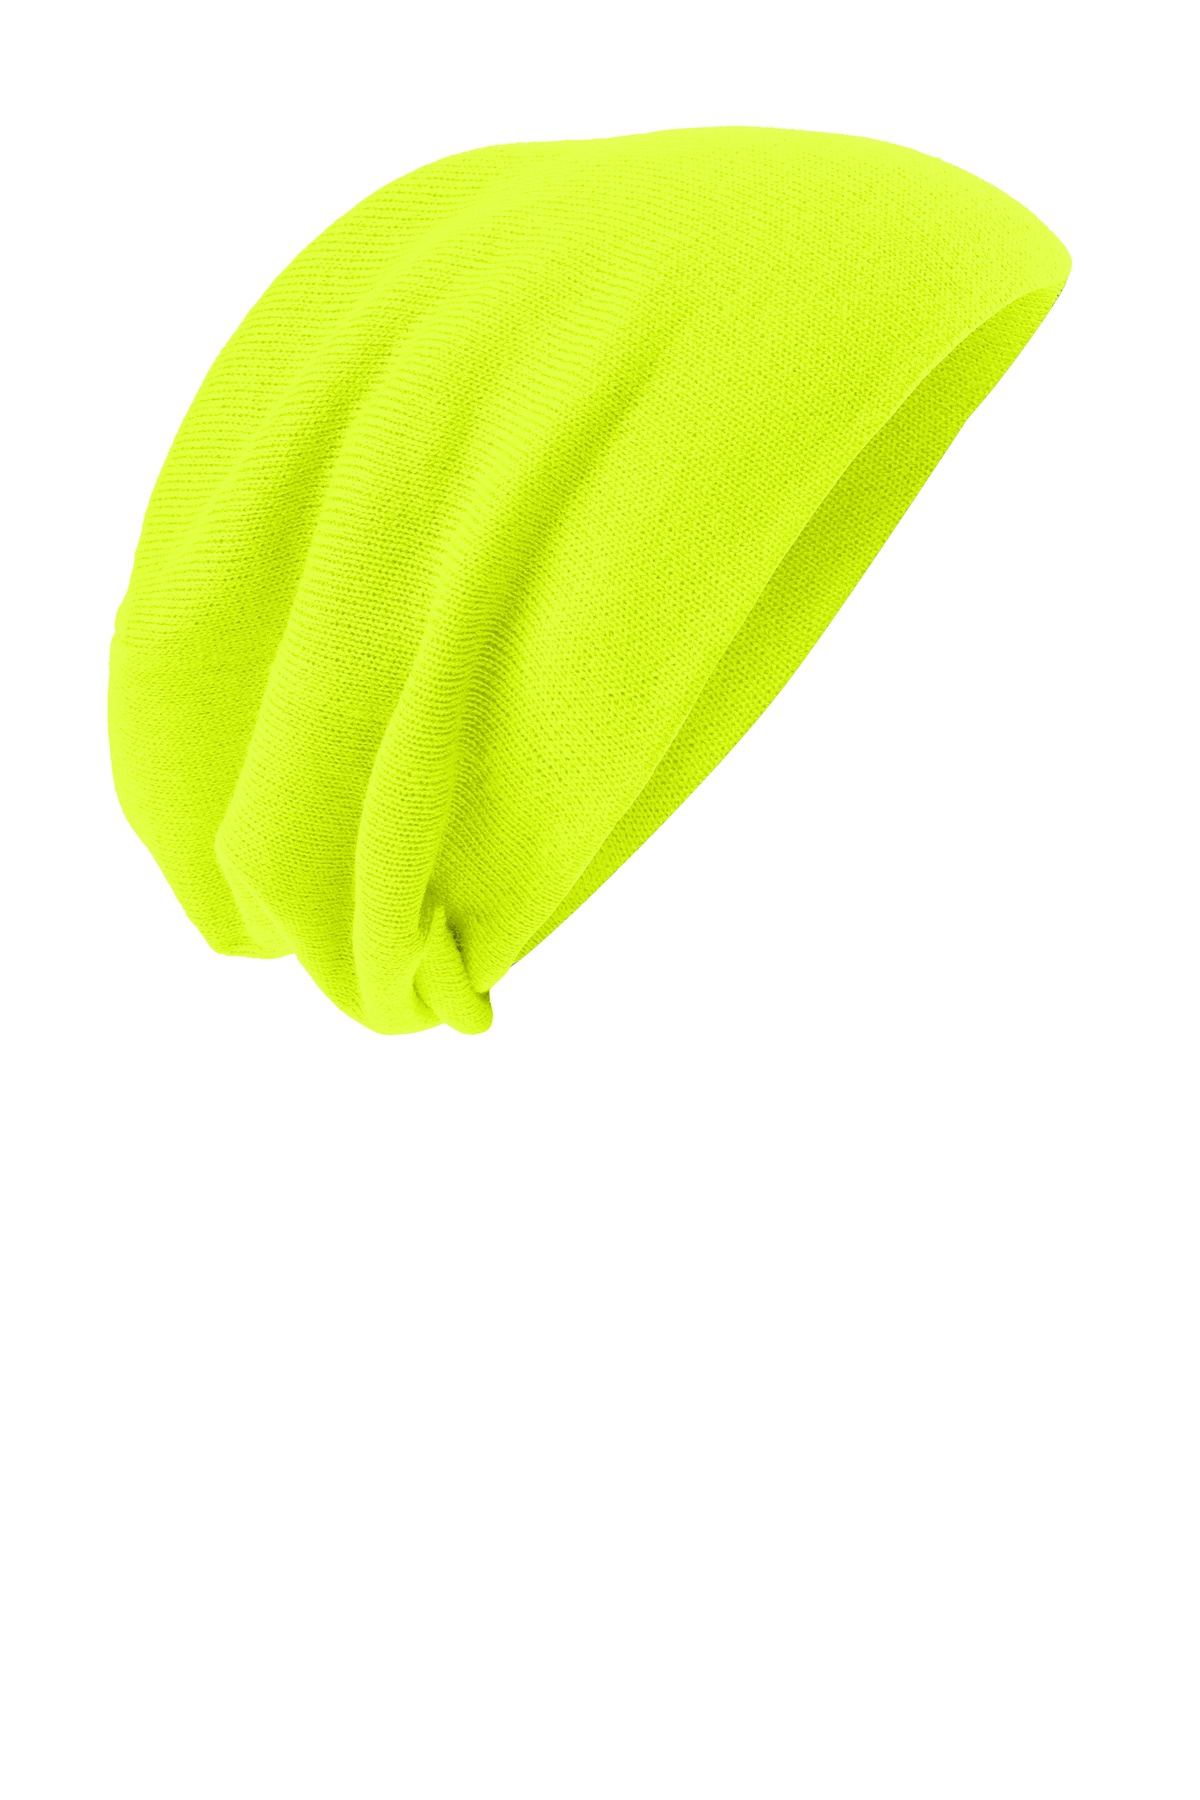 Selected Color is Neon Yellow